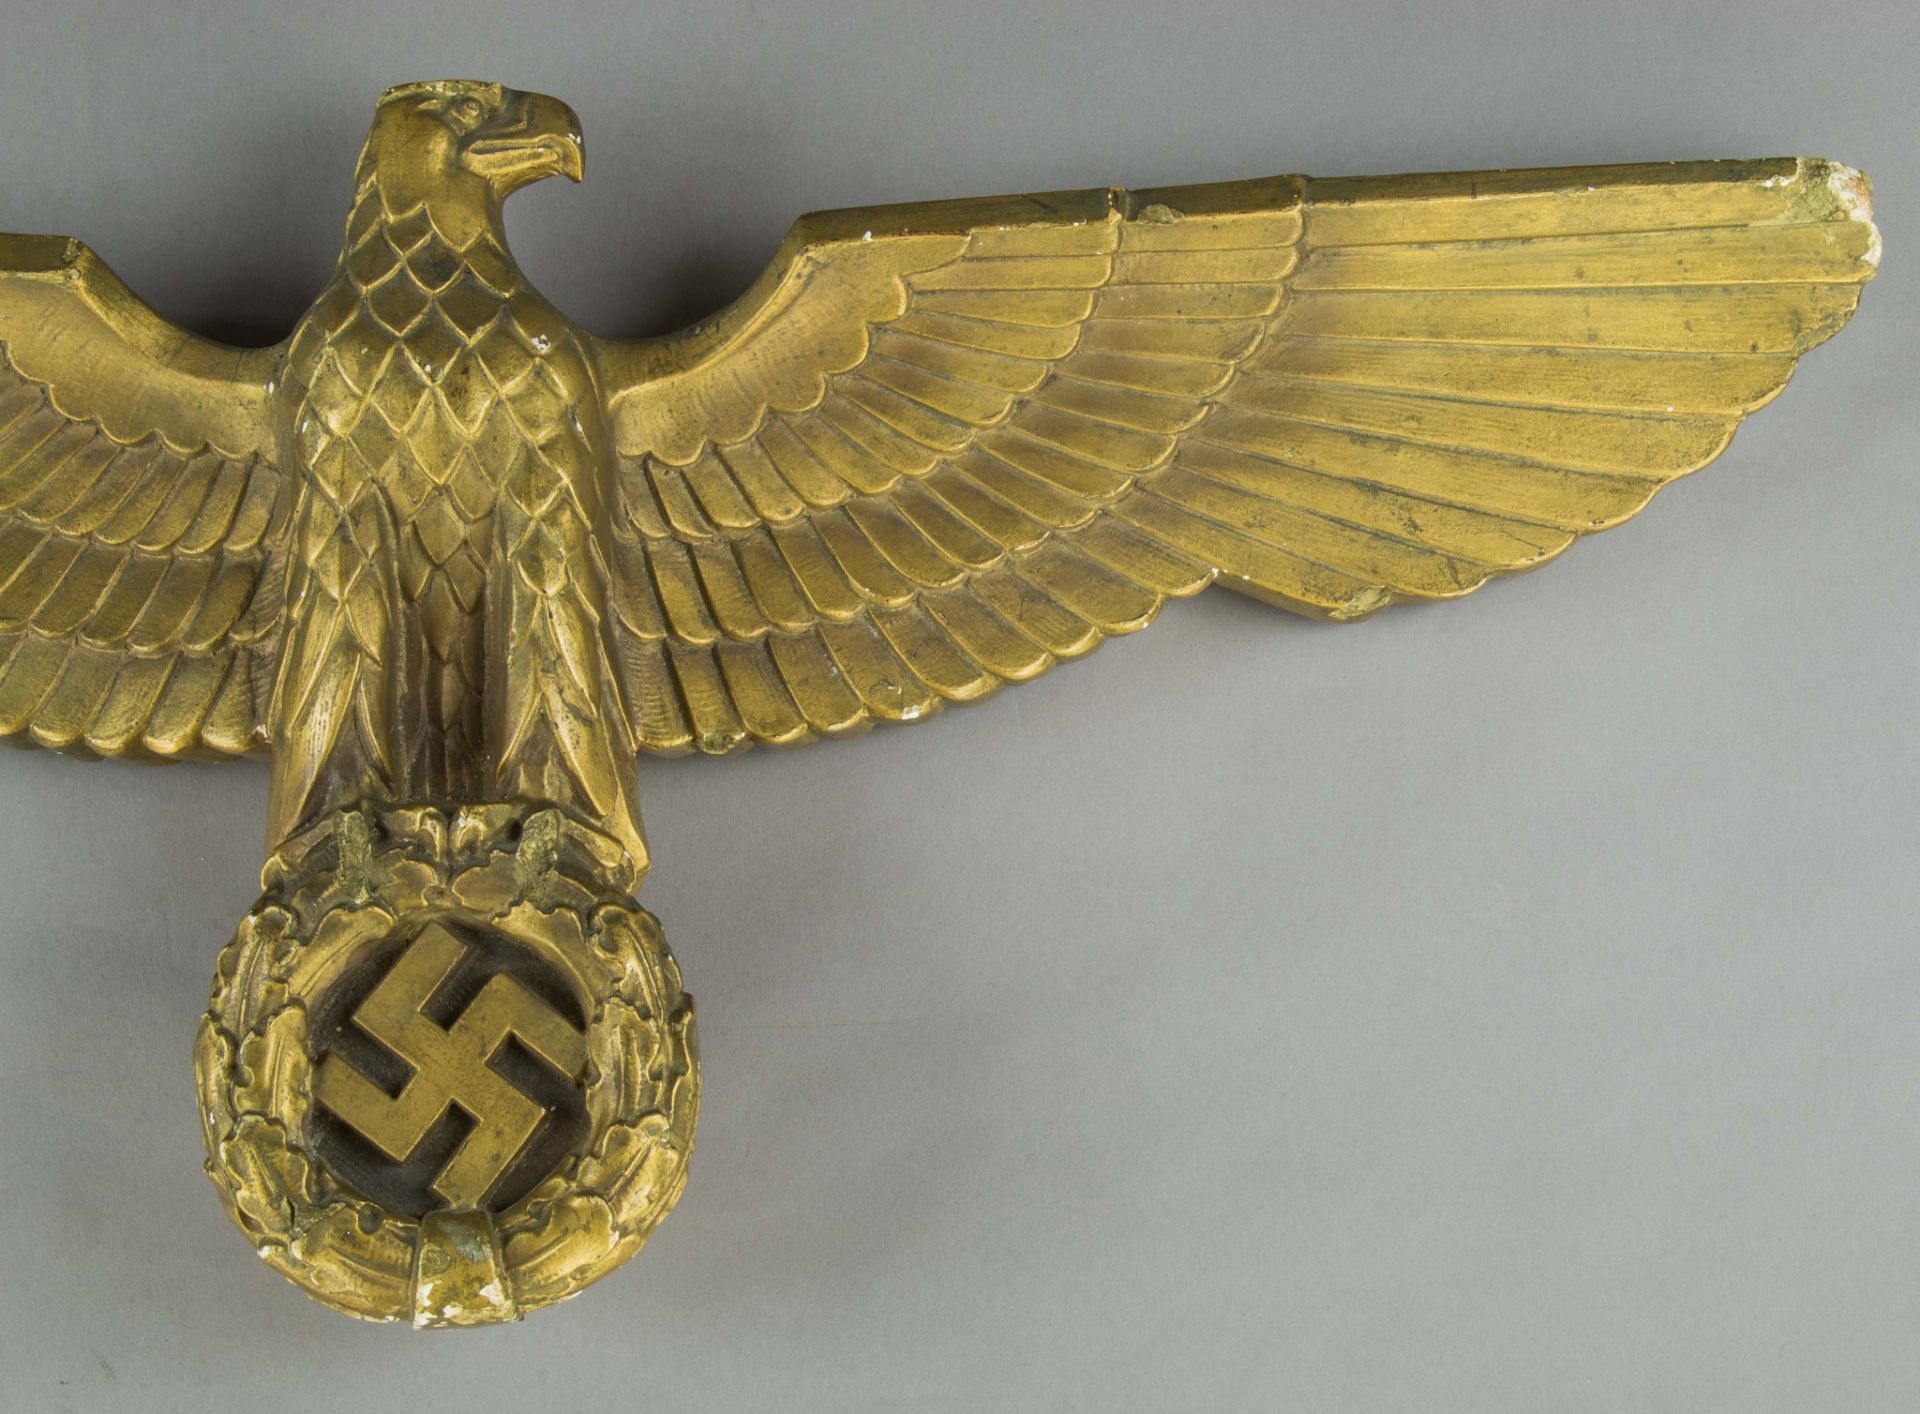 THE GOLDEN EAGLE FROM ADOLF HITLER'S REICHSCHANCELLERY BEDROOM - Image 4 of 13